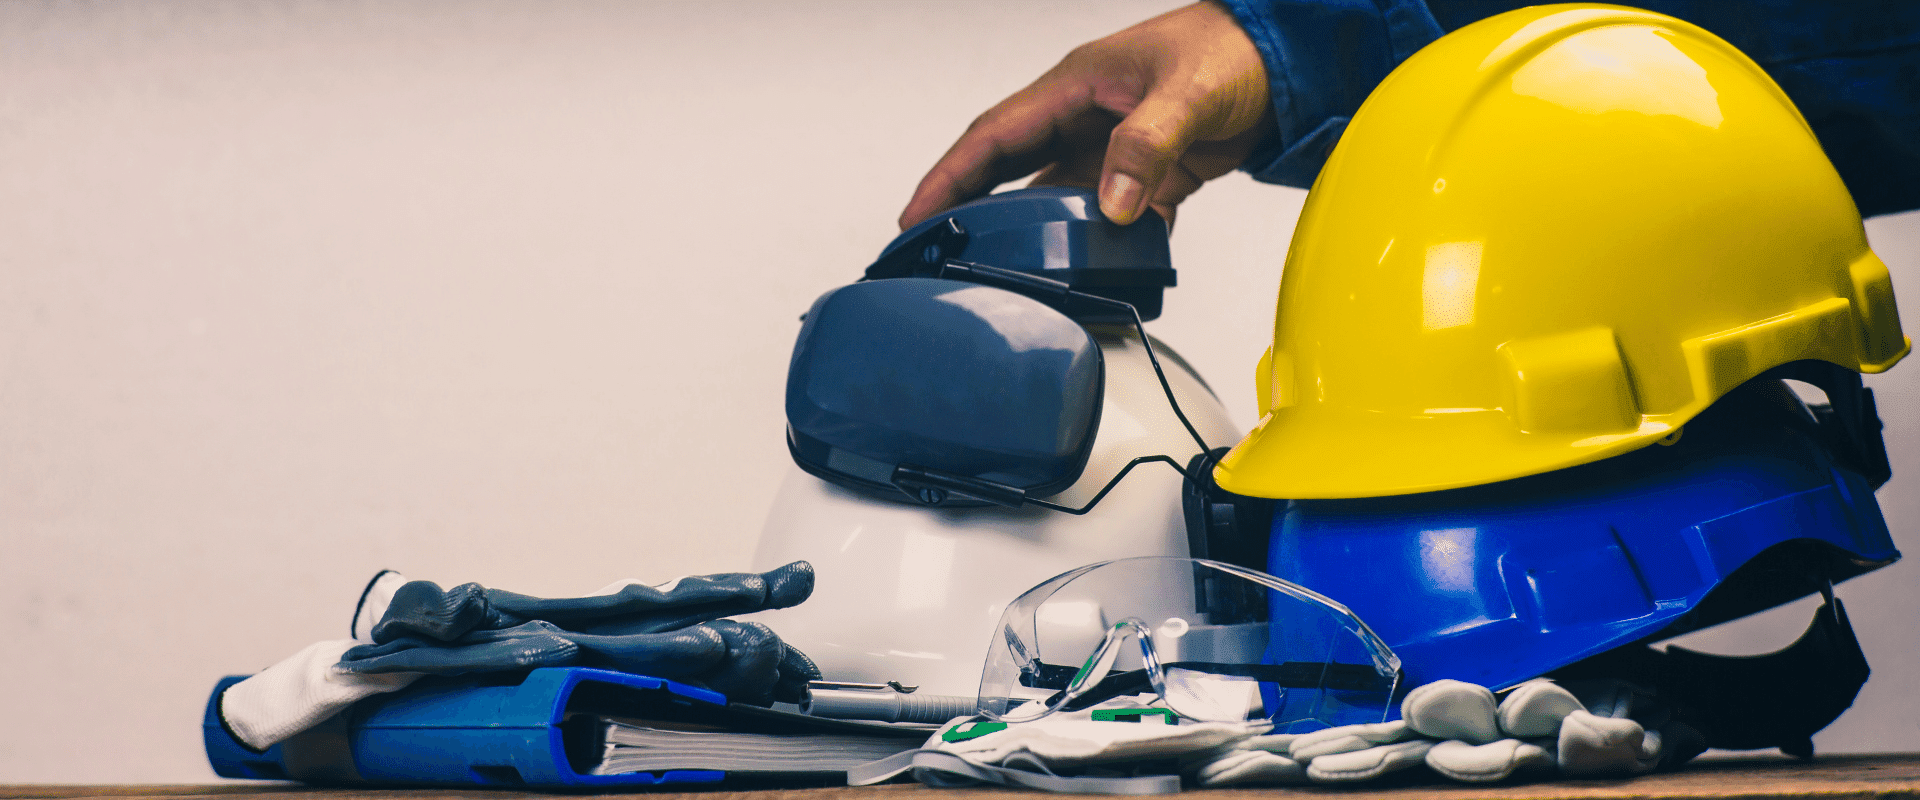 personal protective equipment at work regulations. PPE Regulations regulations